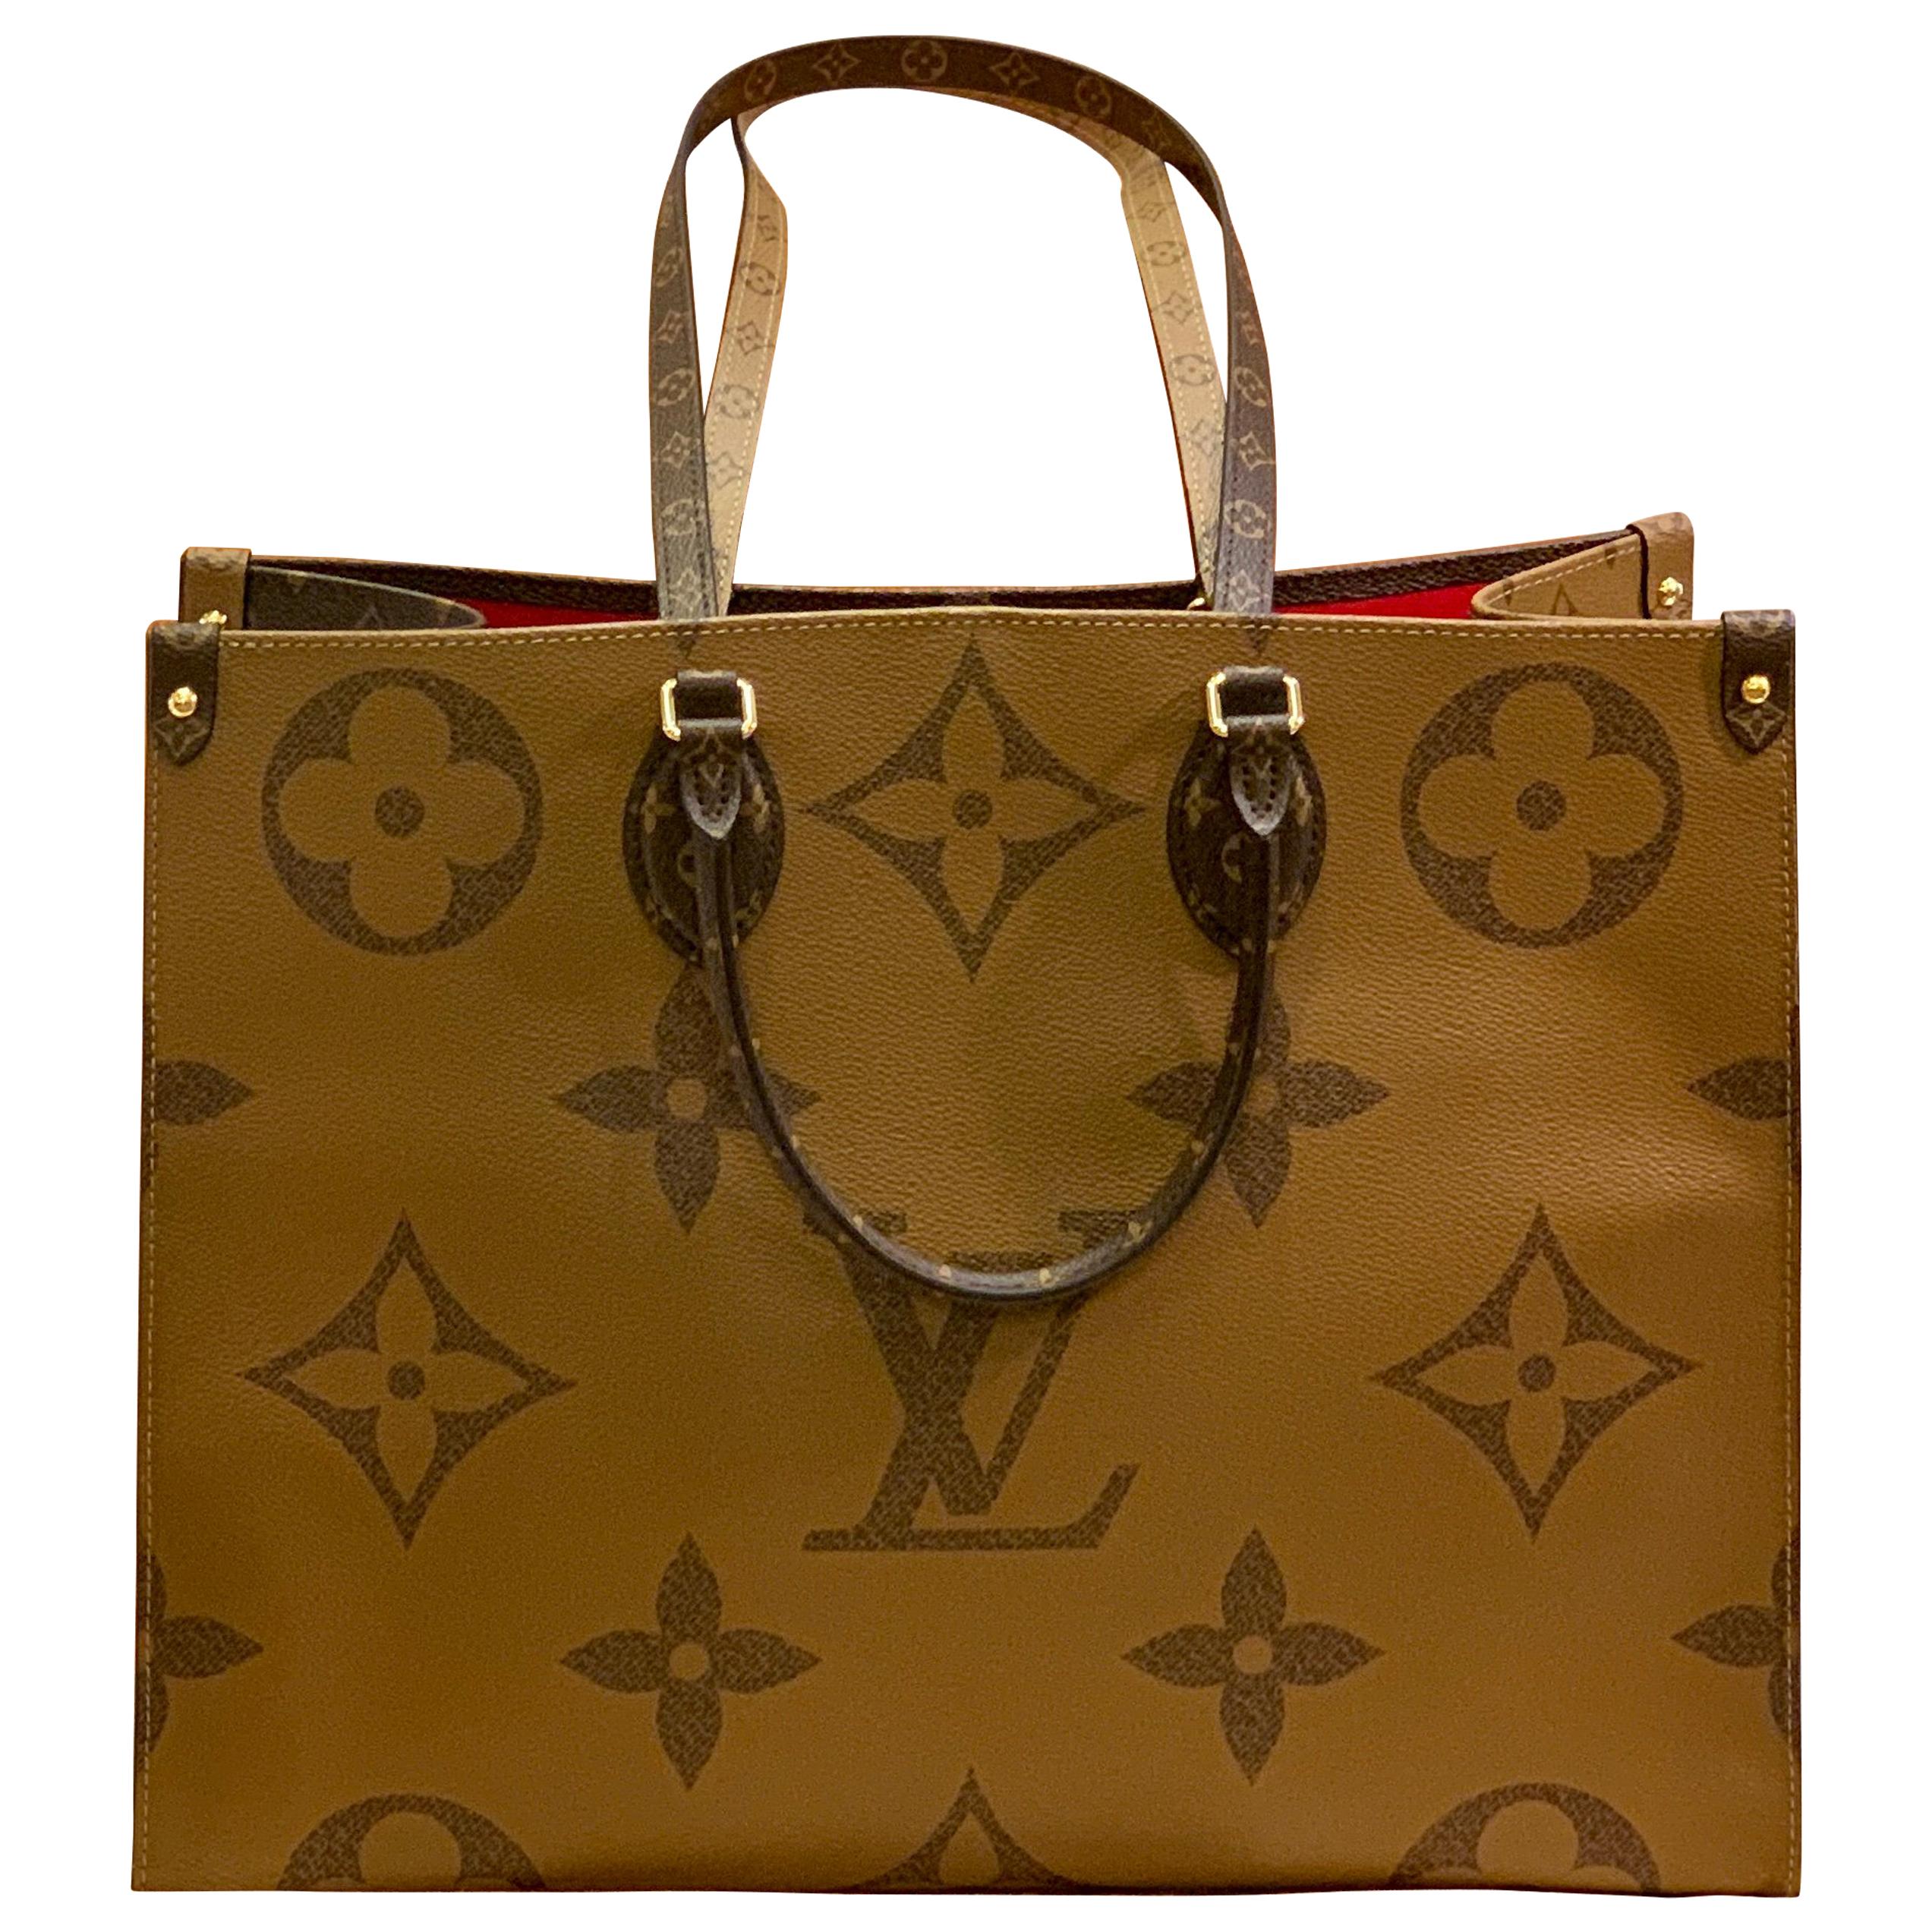 New Sold Out Louis Vuitton ONTHEGO MNG Giant M Rev Tote Bag Summer 2019

Get the bag thousands of people are waiting for! Brand new and never used, with all tags and packaging. This is the NEWEST color and bag of this collection! Be the first to own